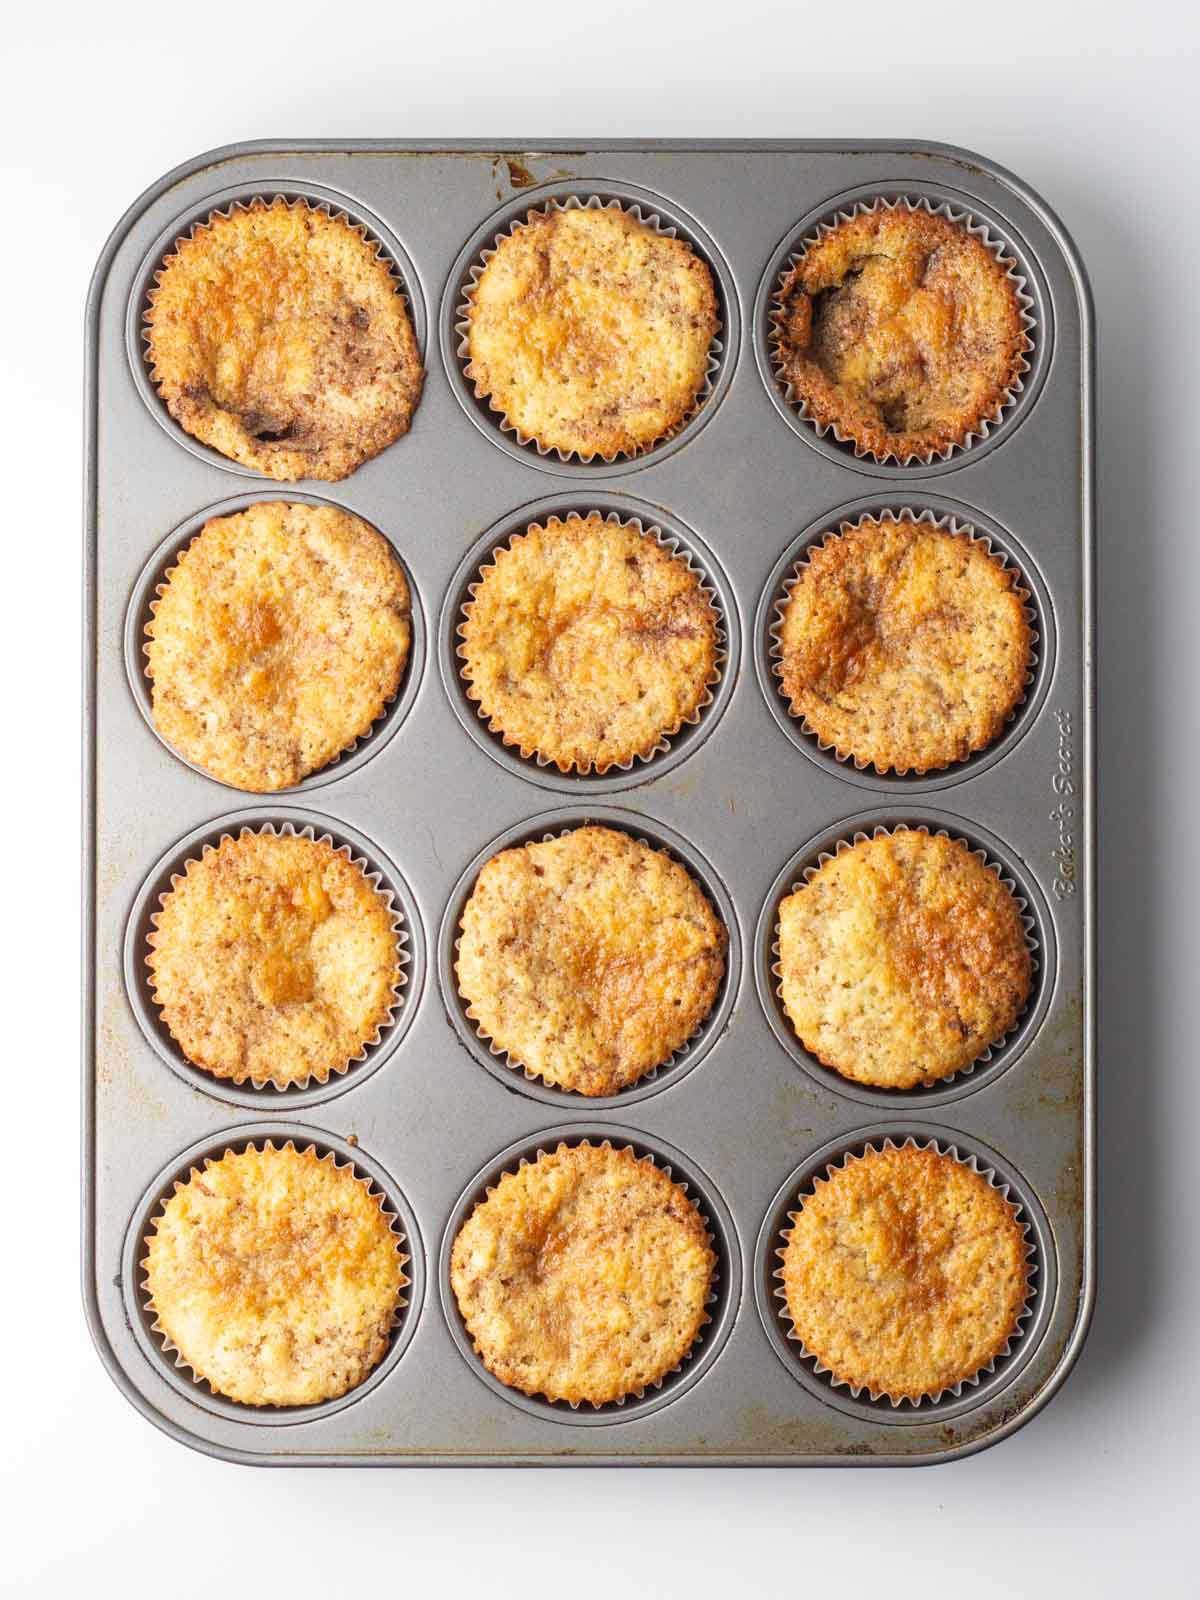 Baked cupcakes in the lined muffin tin.